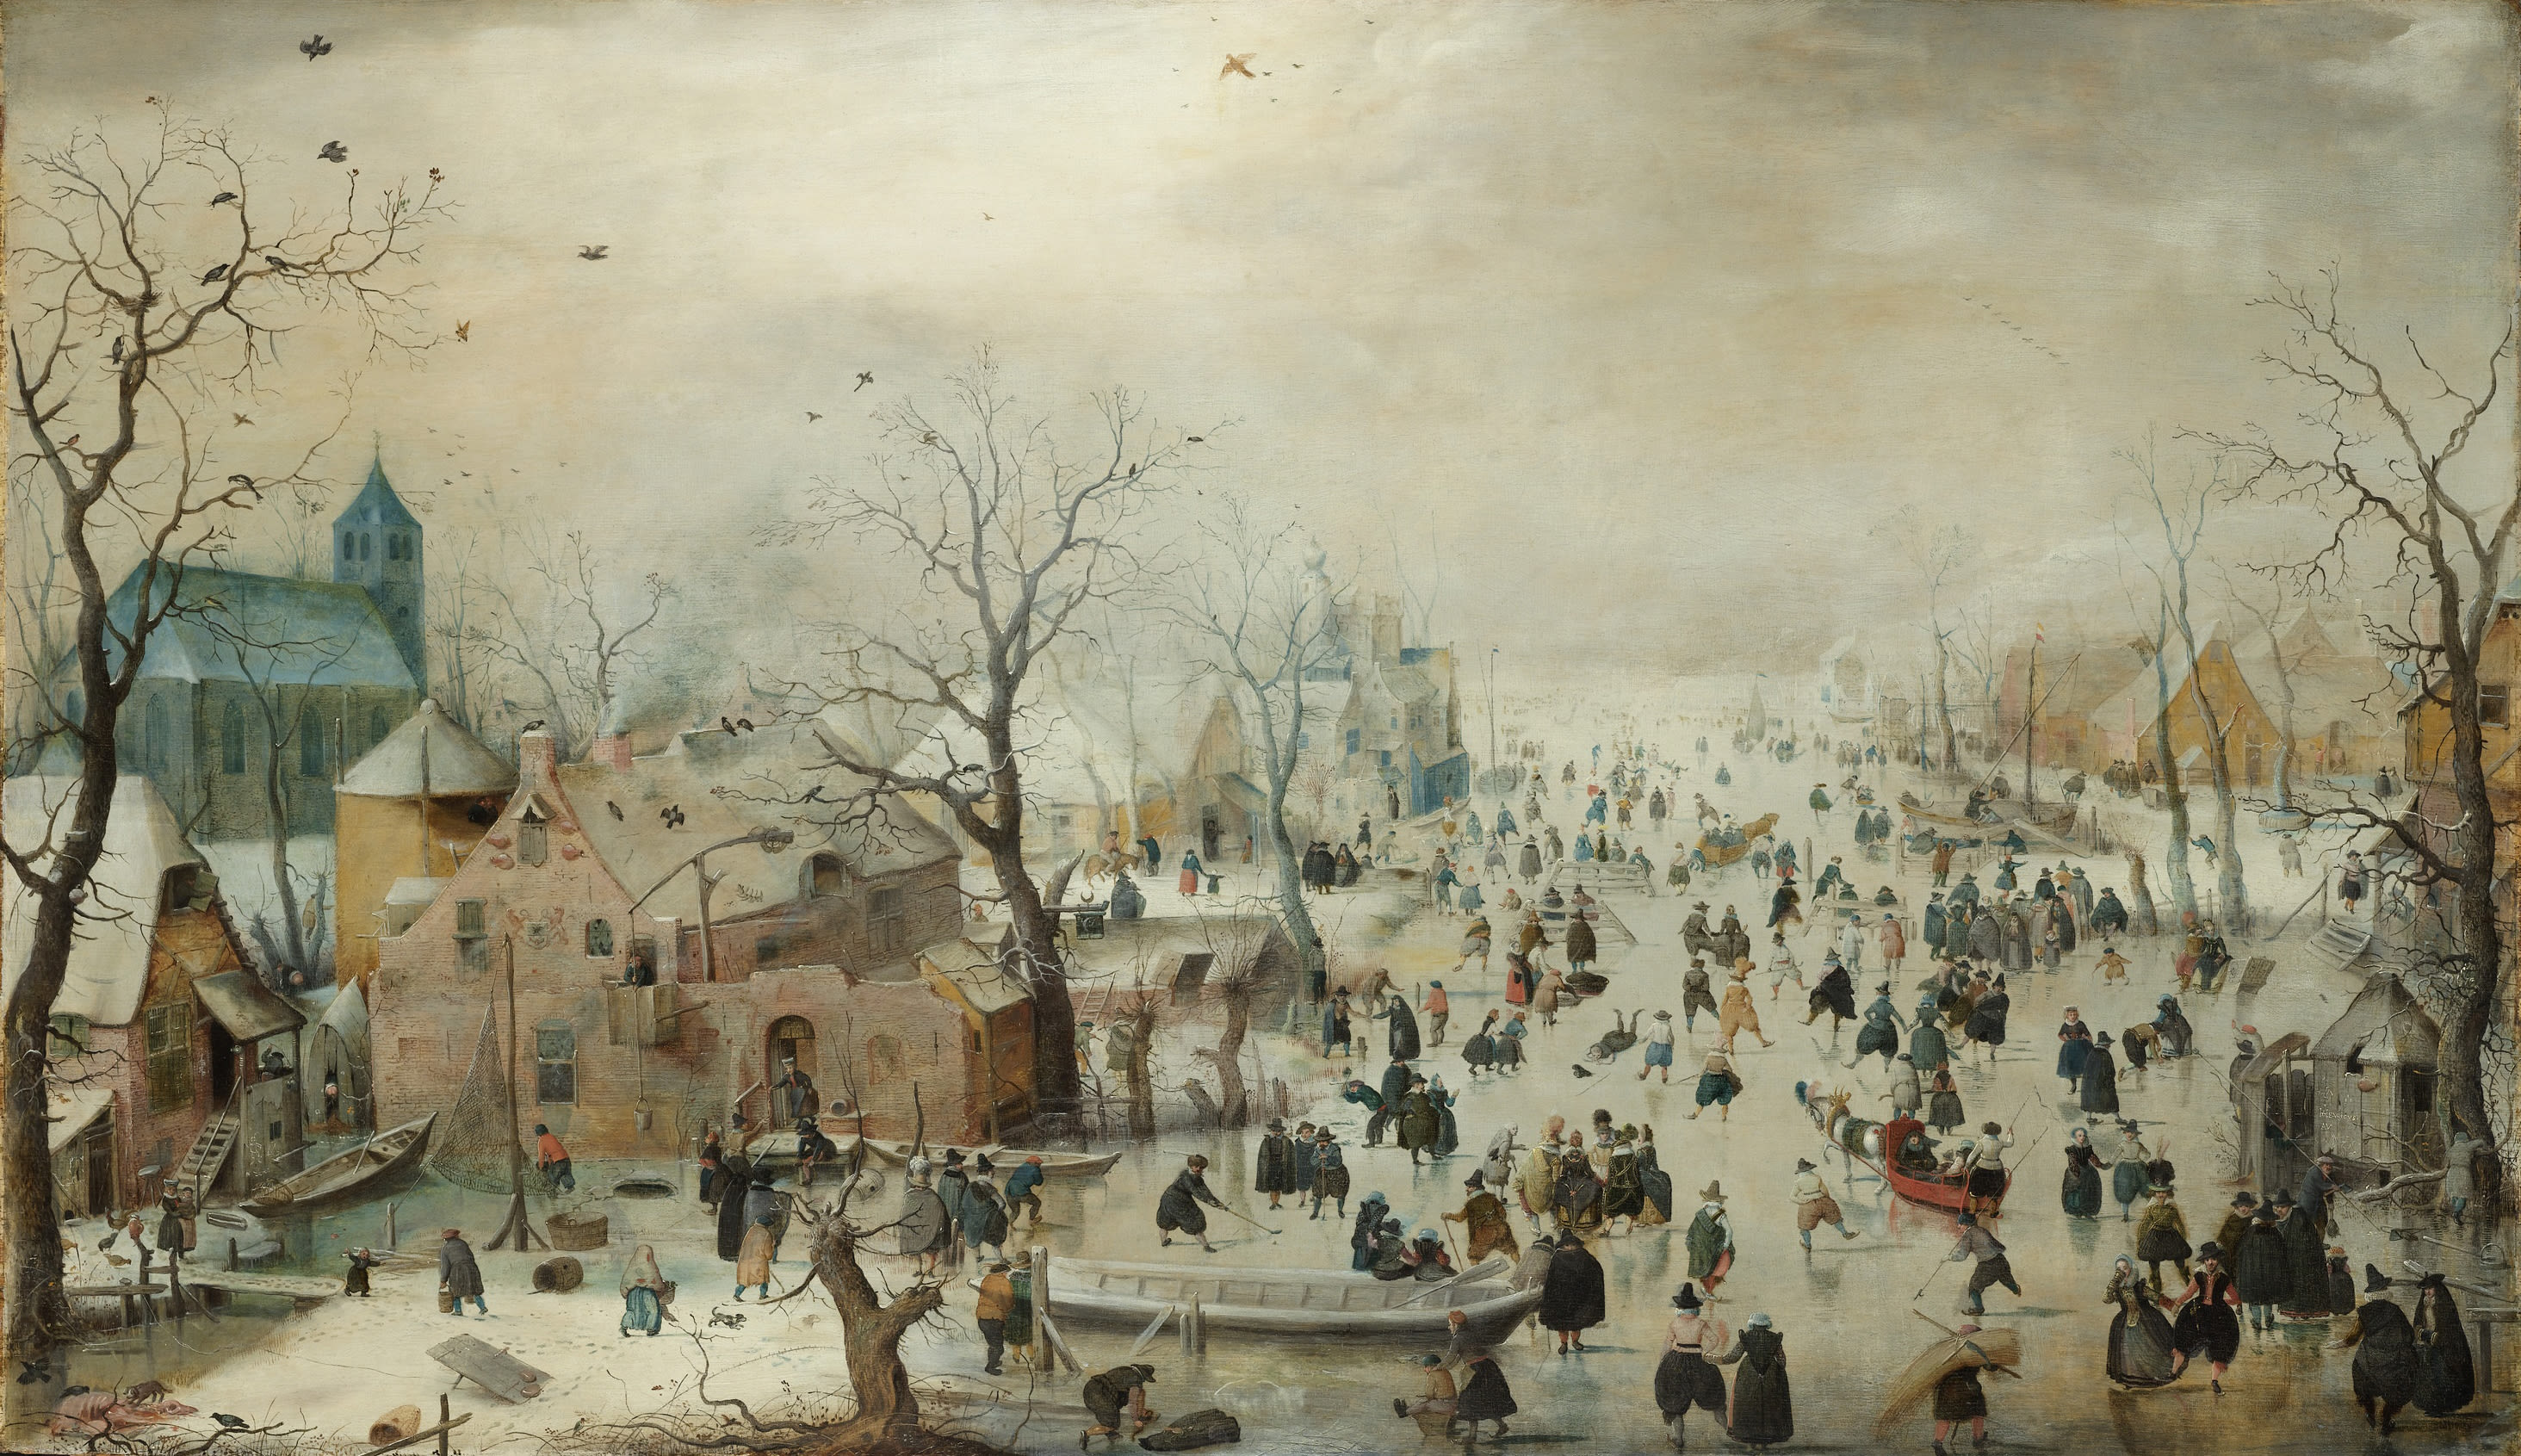 painting, crowds of people ice skating among trees and houses.